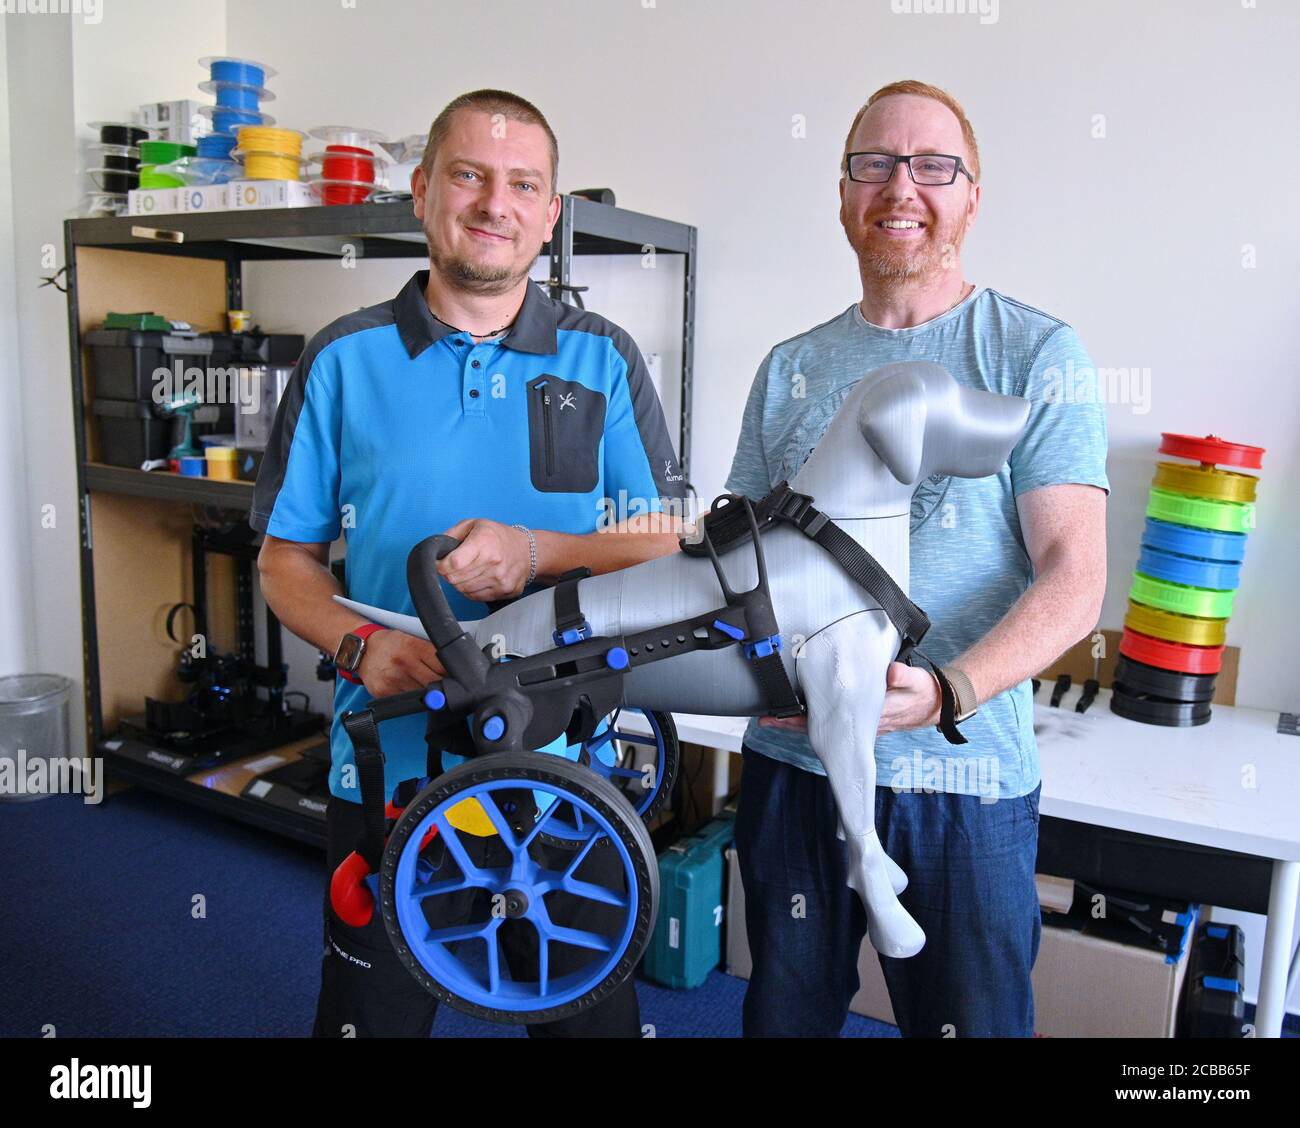 Brno, Czech Republic. 11th Aug, 2020. AnyOneGo, Czech company from Brno, manufactures prosthetics and wheelchairs for animals, most parts prints on 3D printers. On the photo co-founders of the company L-R Martin Schenk and Ivan Lukas show a wheelchair for a dog, on August 11, 2020, in Brno, Czech Republic. (CTK photo/Igor Zehl) Stock Photo